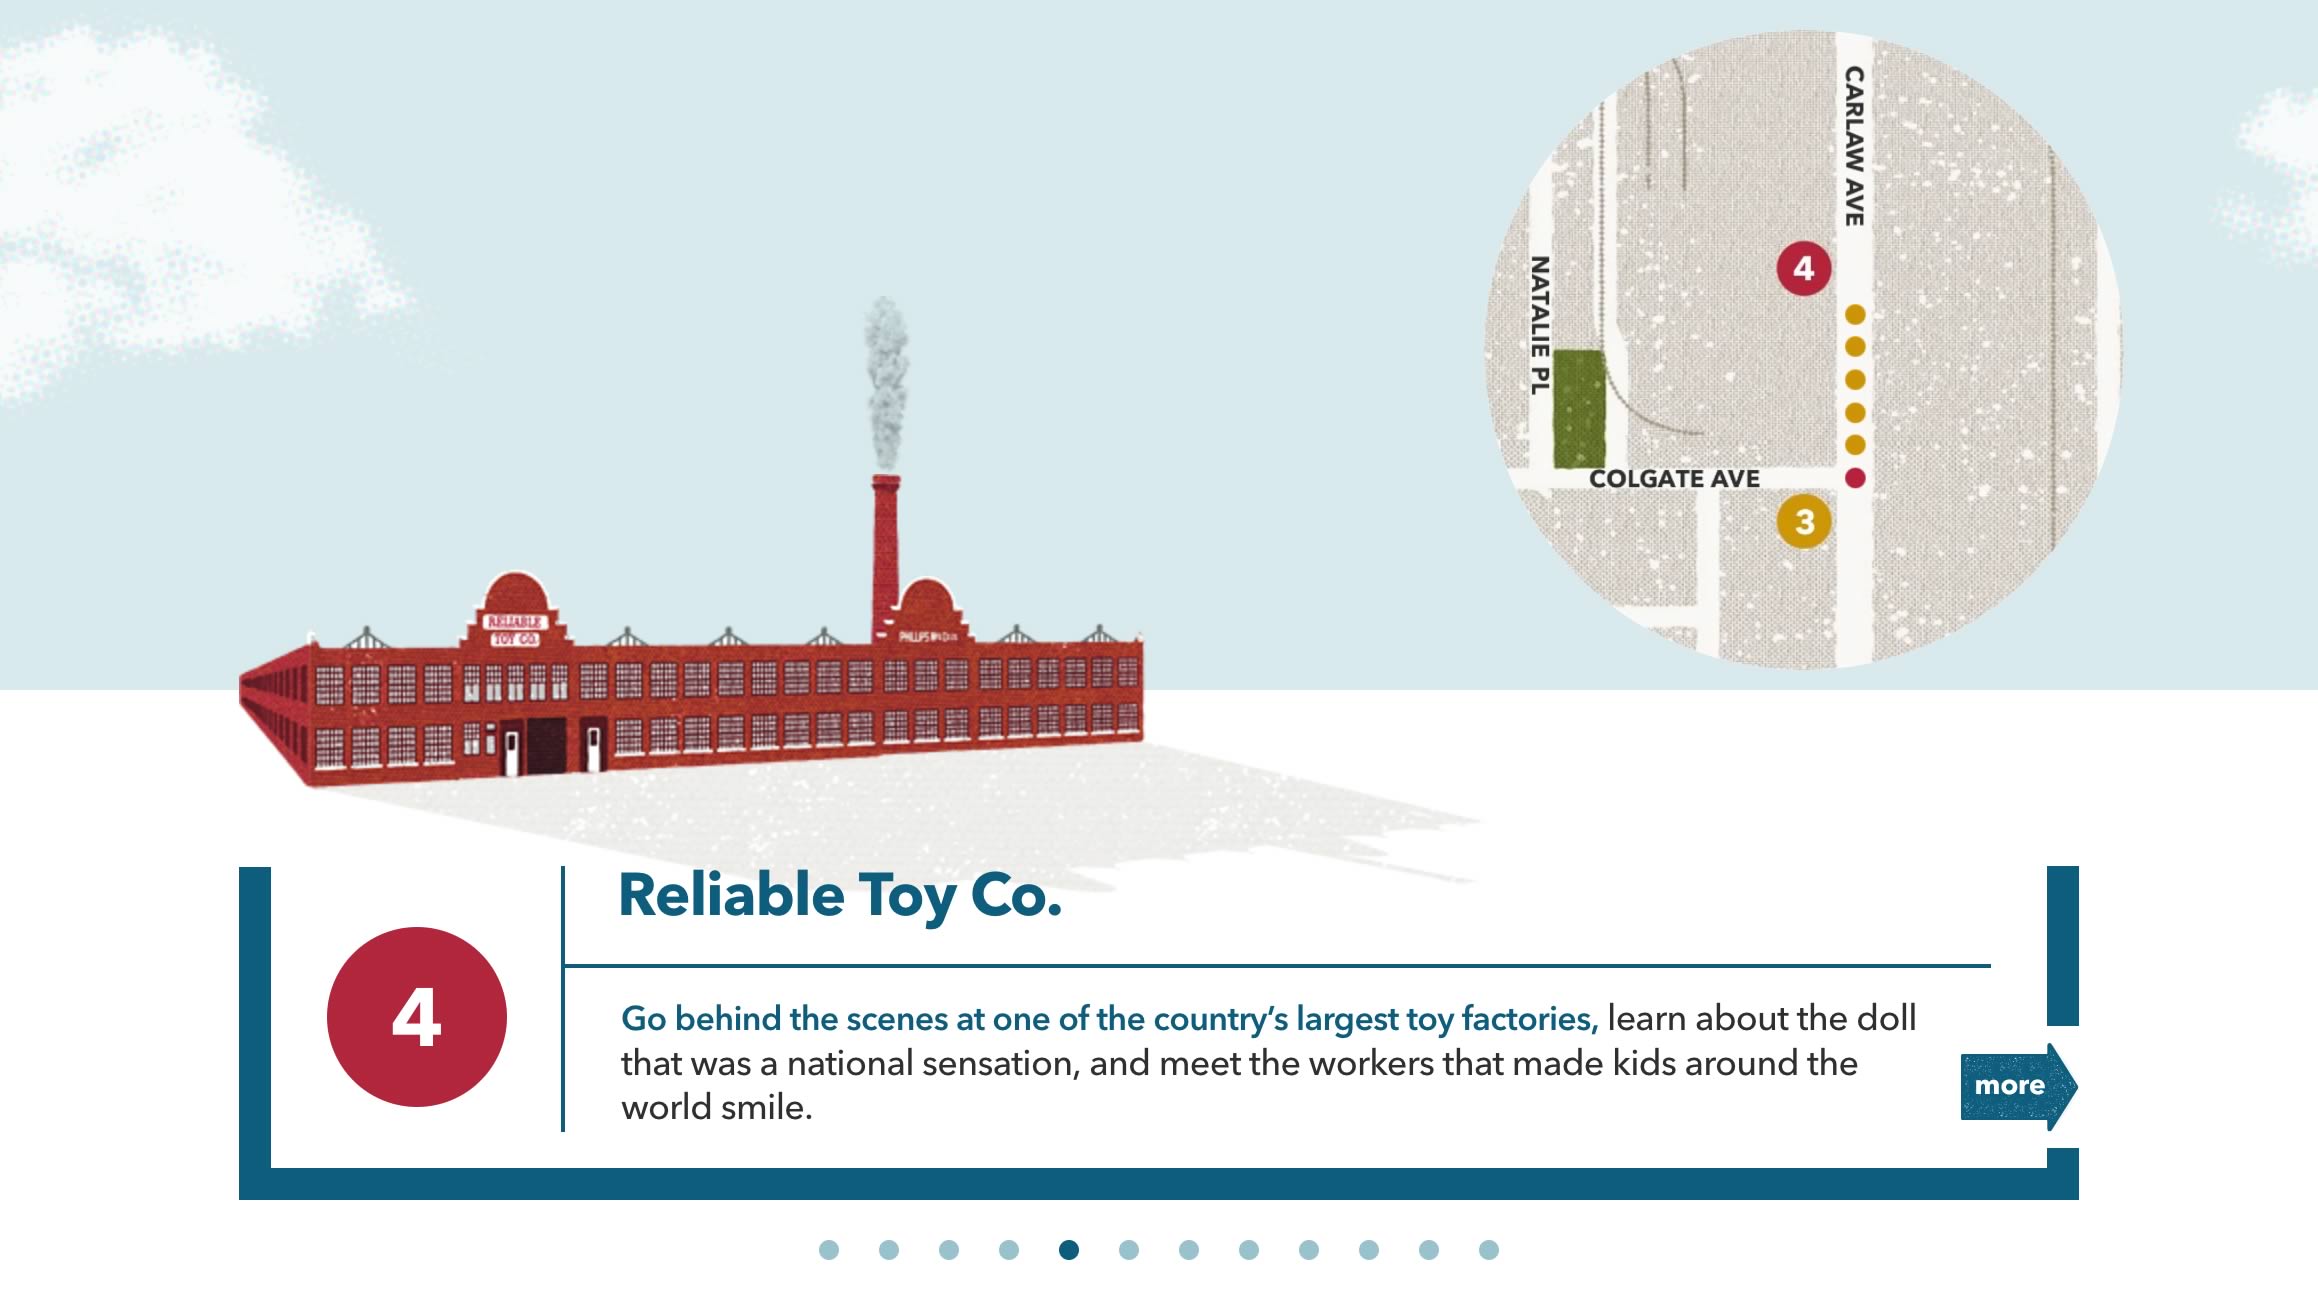 Capture of the homepage tour navigation modal window from the Made in Toronto tour/website ('Reliable Toy Co.' stop displayed)